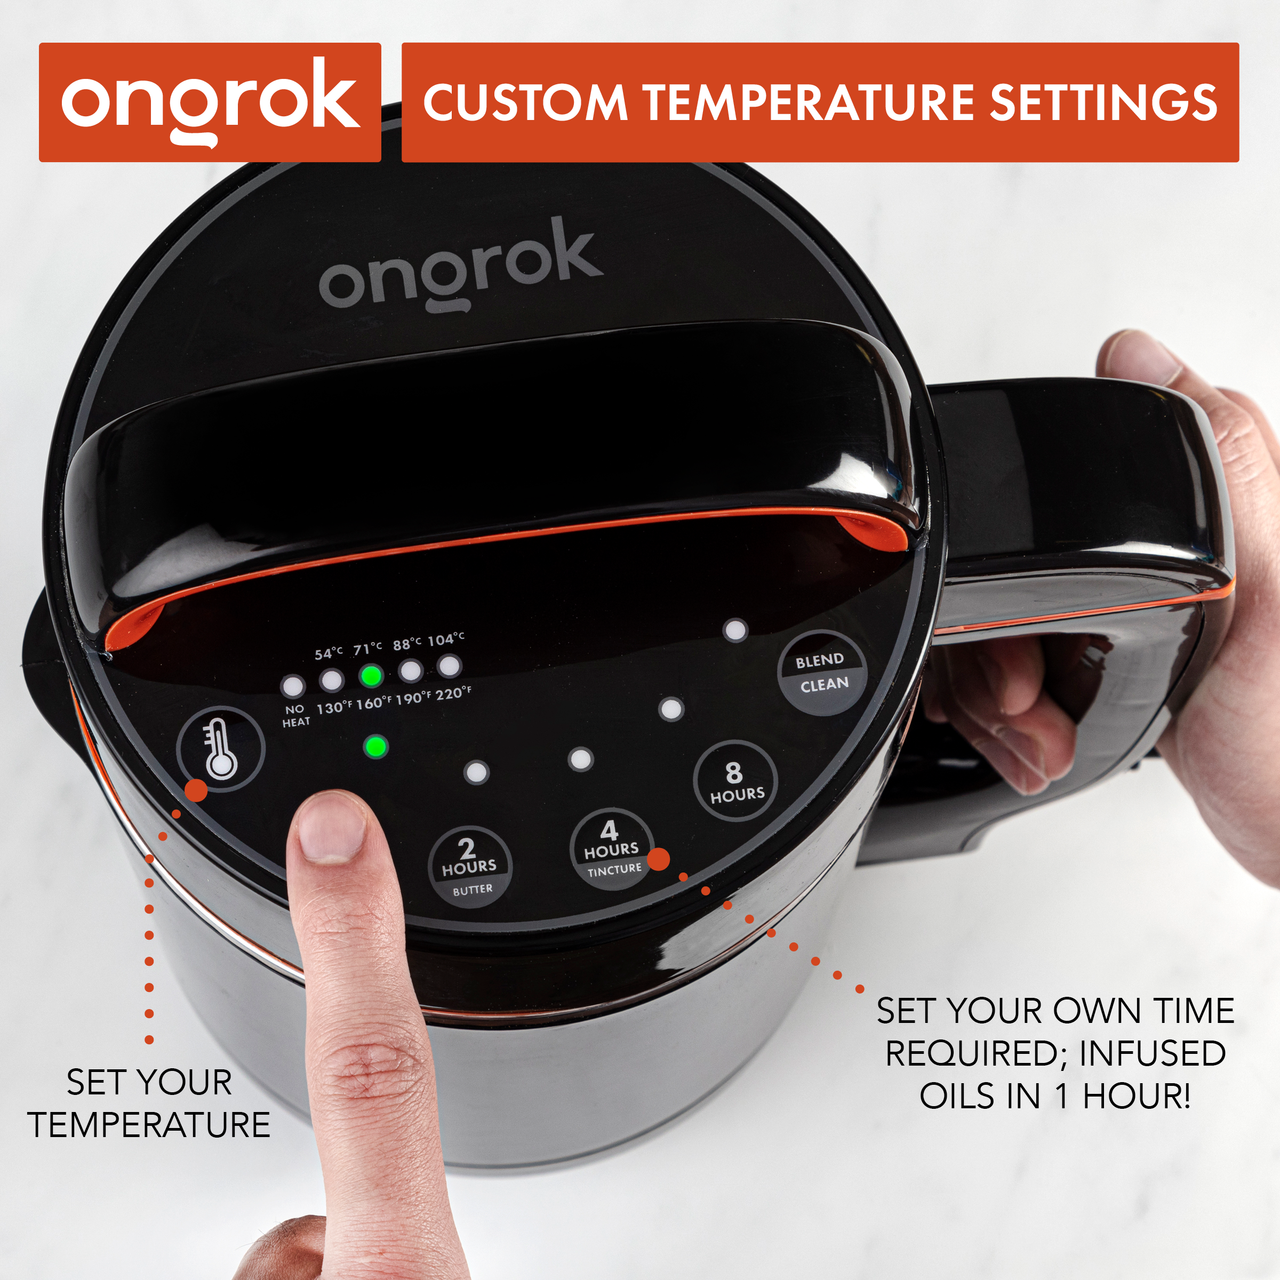 Ongrok Small Botanical Infuser Machine and Kit